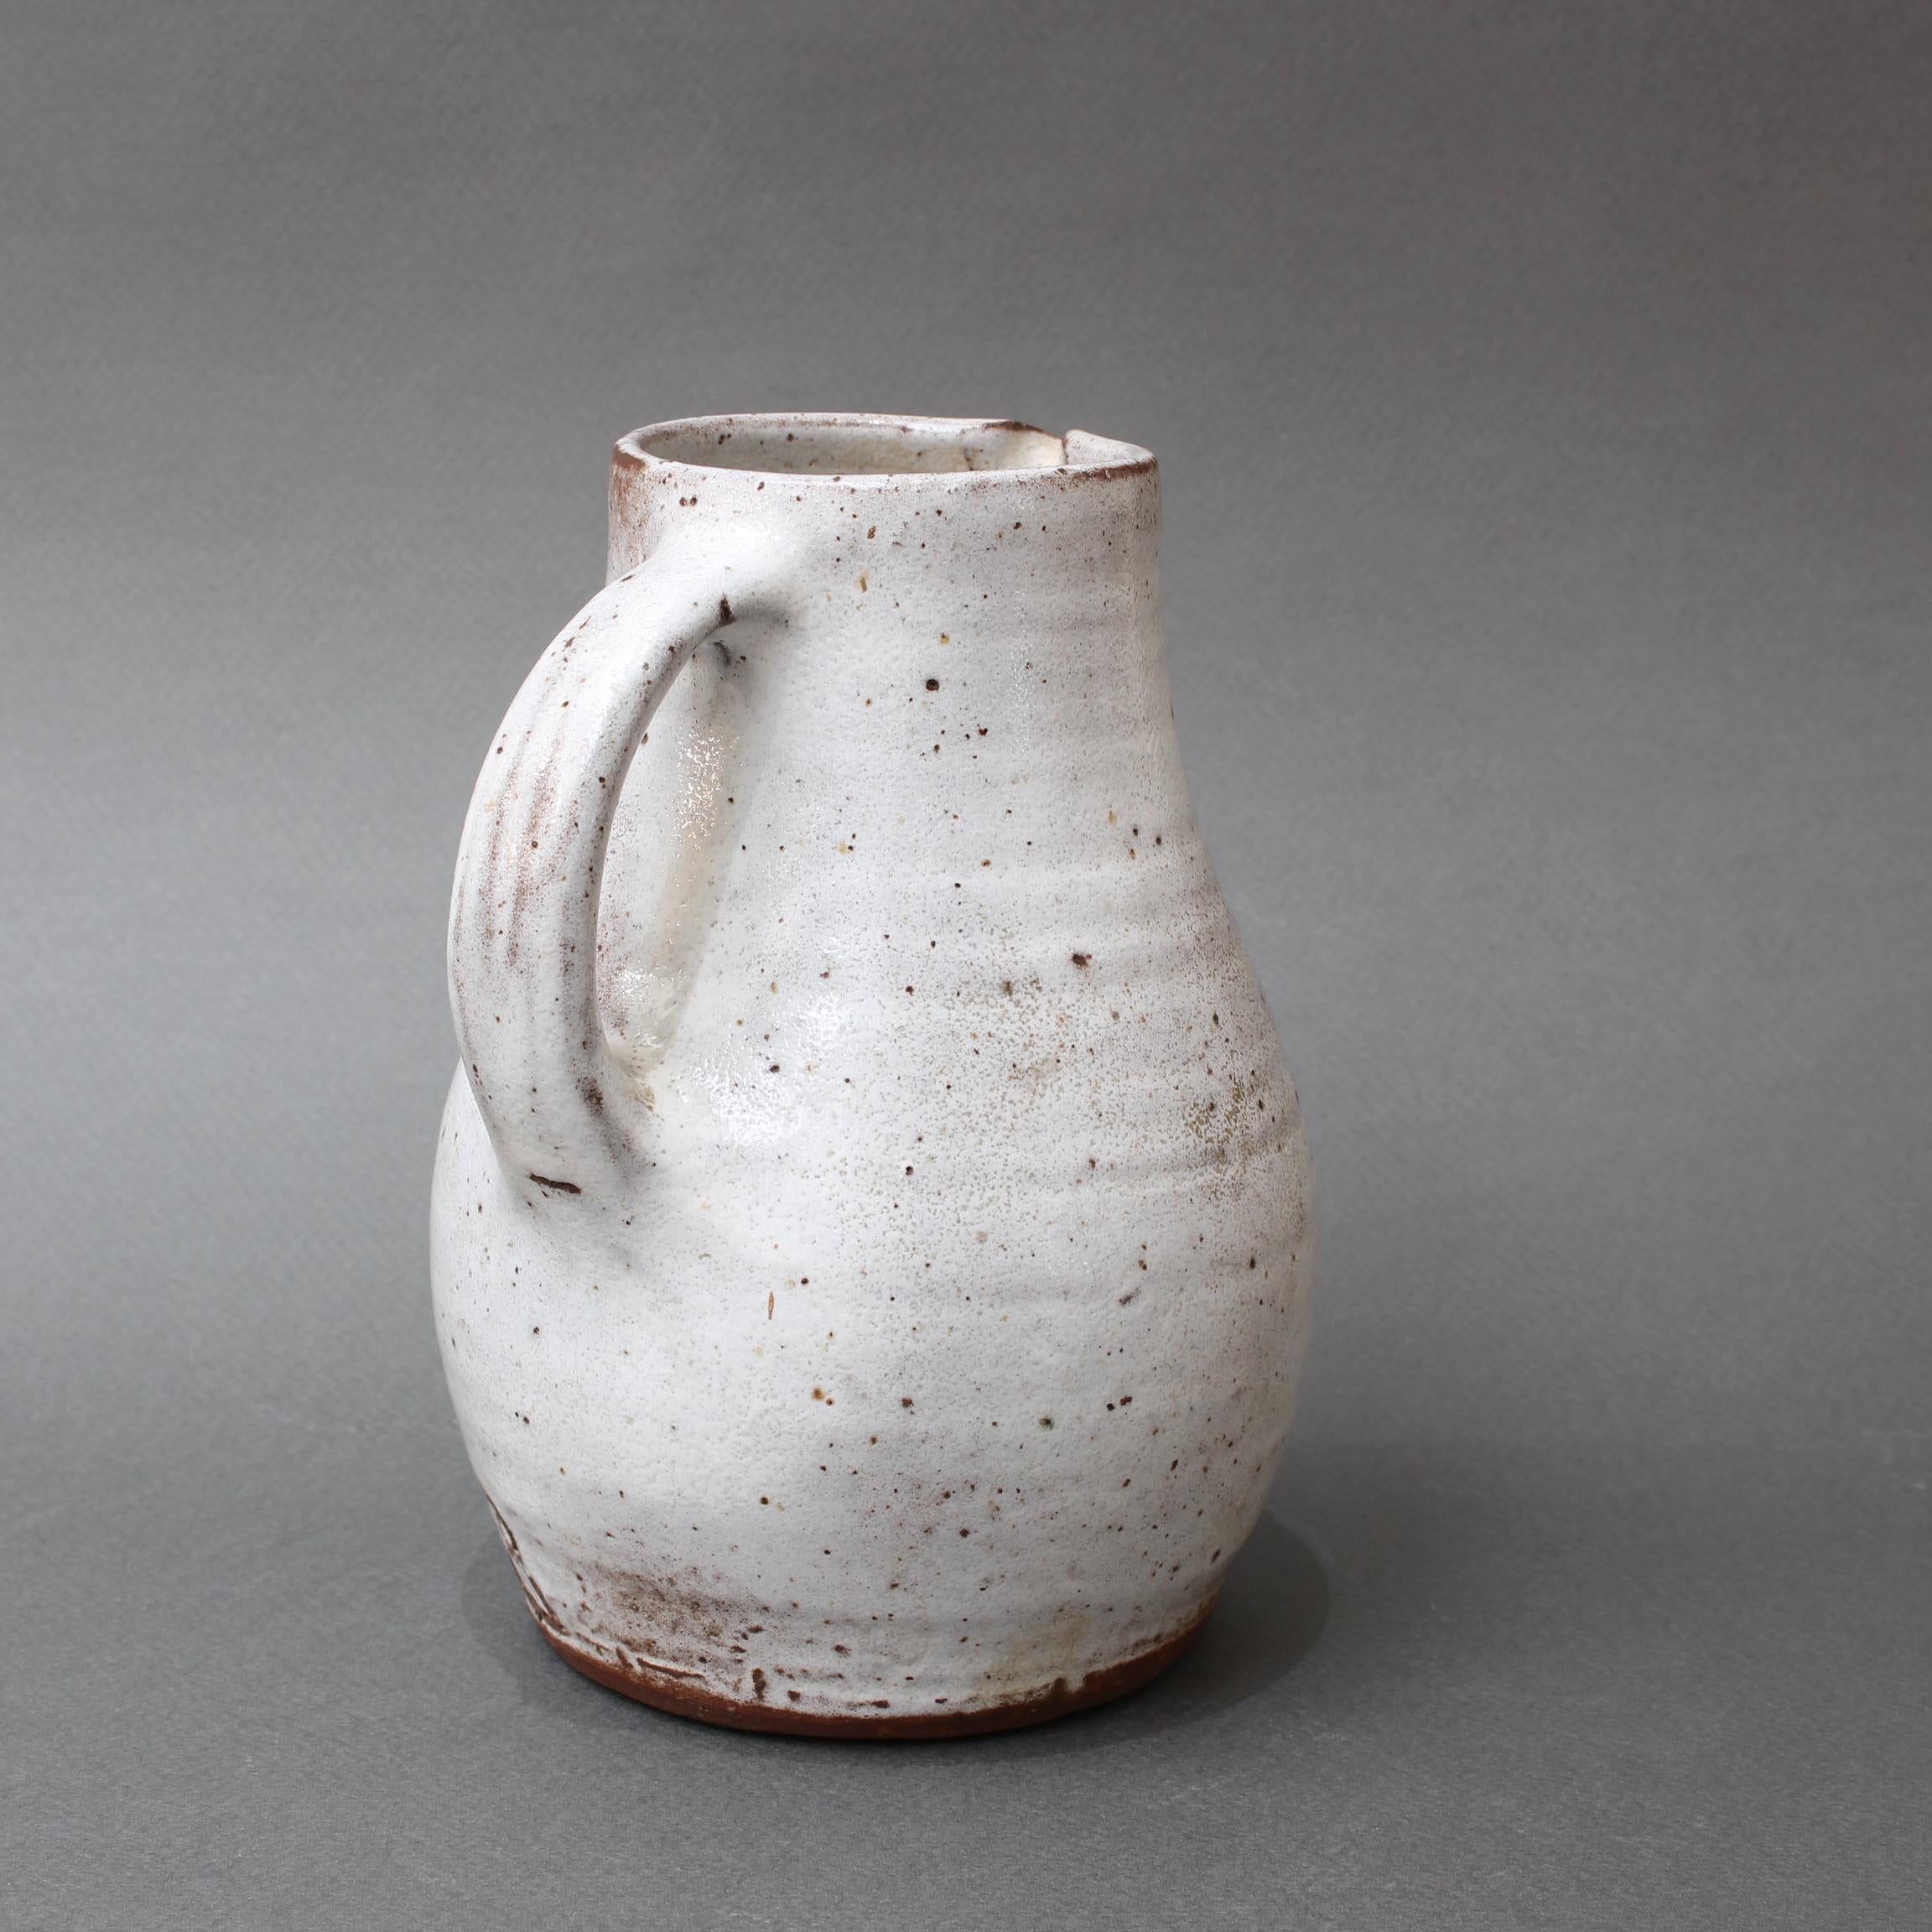 Mid-Century French ceramic pitcher by Jeanne & Norbert Pierlot (circa 1960s). With an off-white base and brown sandstone accents, this small, rustic pitcher with handle and spout is a delight. The glazed parts that are predominantly off-white are